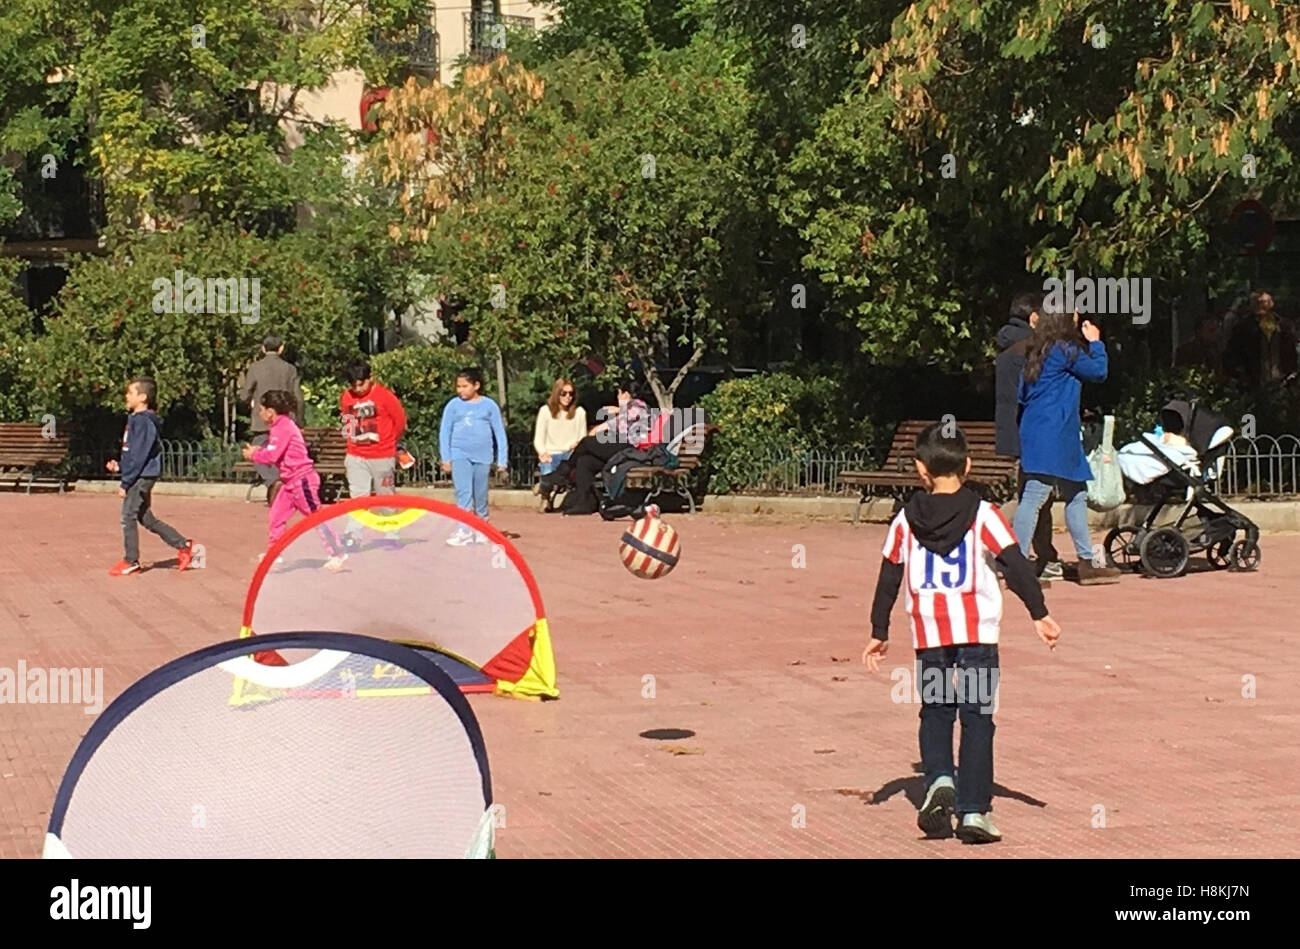 Madrid, Spain. 6th Nov, 2016. Children playing on the Olavide square in Madrid, Spain, 6 November 2016. After an appeal by the Association of Families with Children in Public Schools (CEAPA), which represents more than 12,000 parental unions in Spain, students are said not to do their homework at all weekends in November. PHOTO: EMILIO RAPPOLD/dpa/Alamy Live News Stock Photo